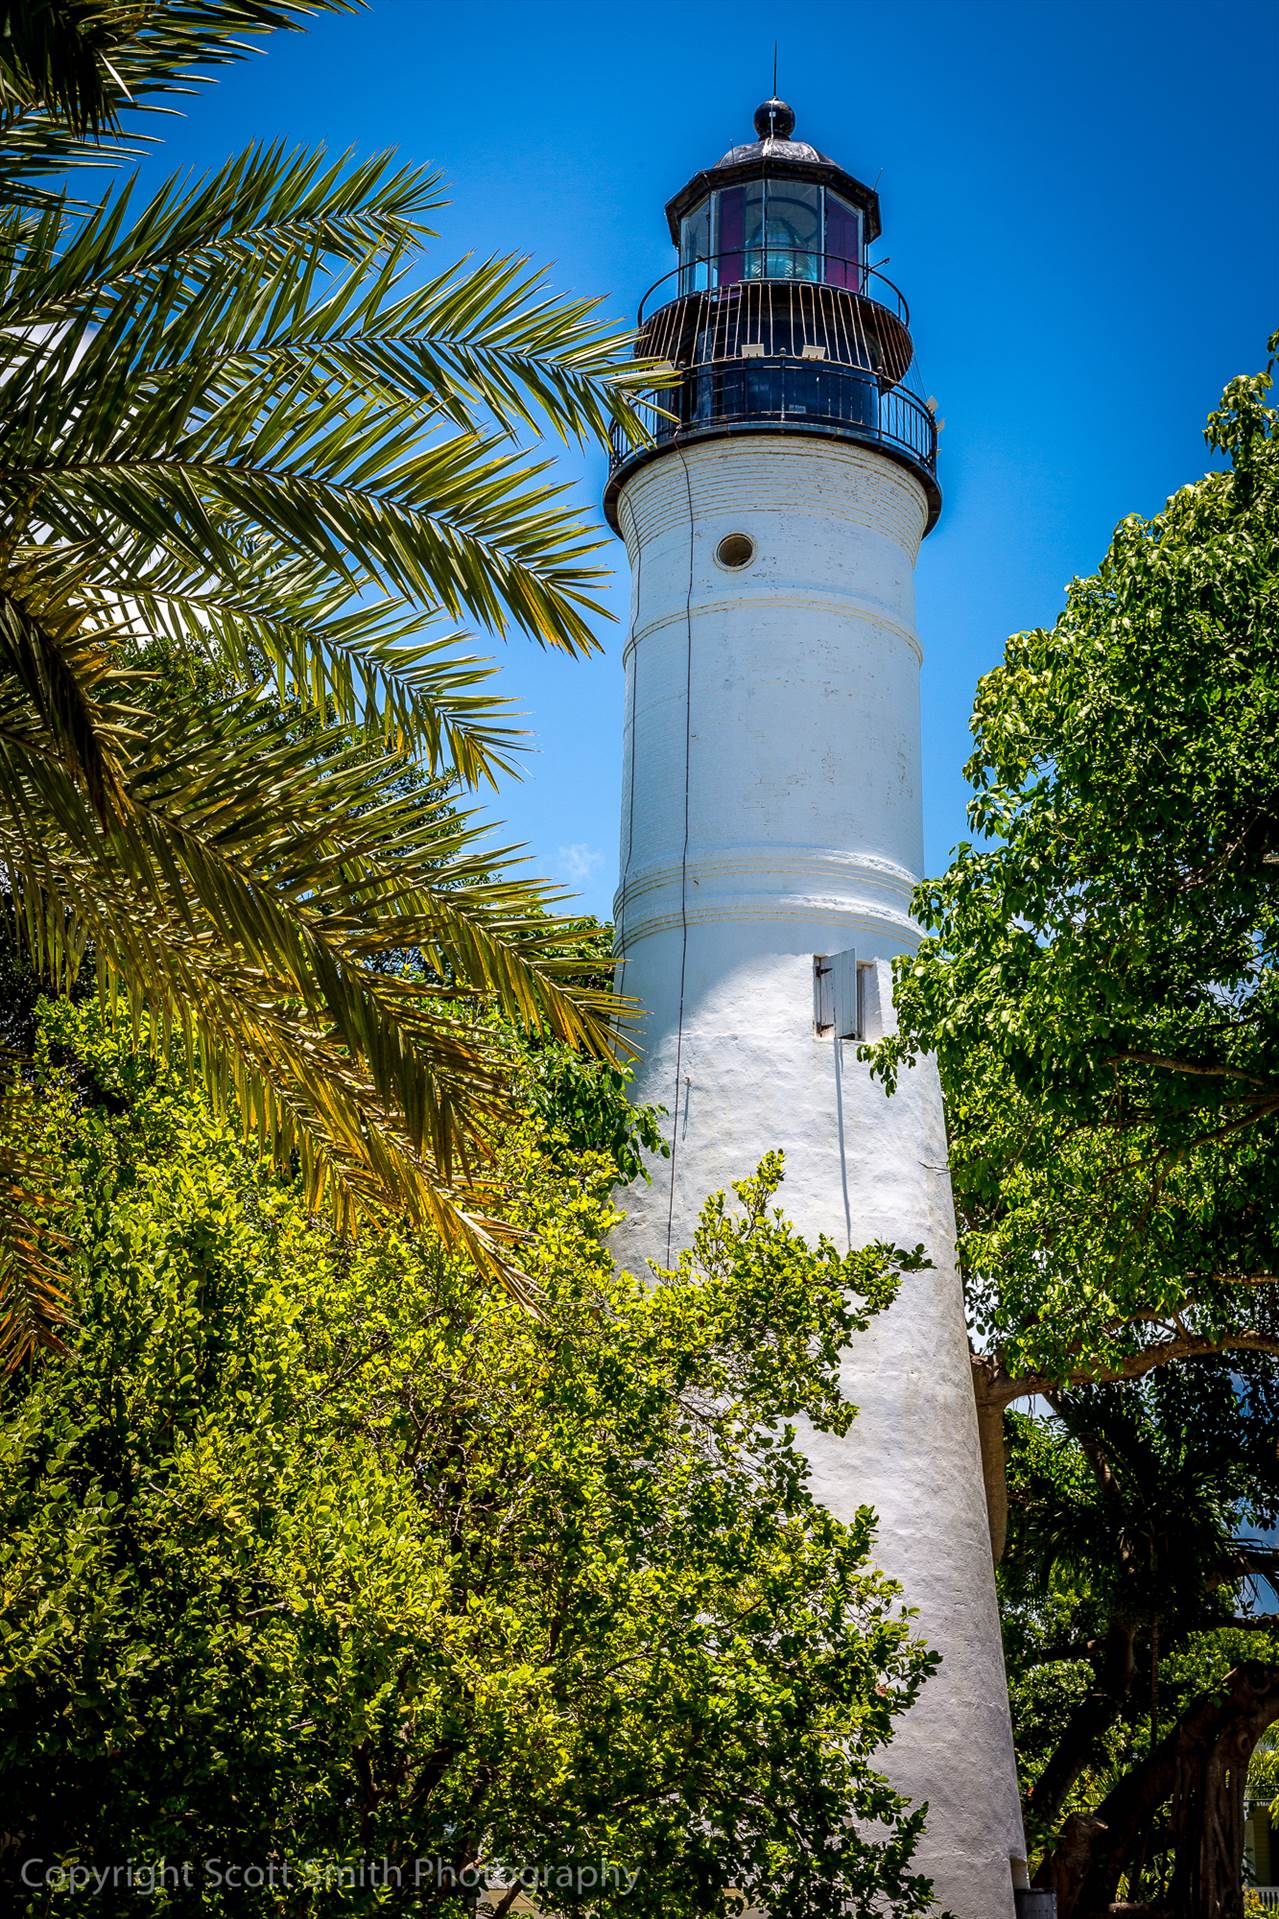 Key West Lighthouse - Across from Hemingway's house in Key West, Florida by Scott Smith Photos